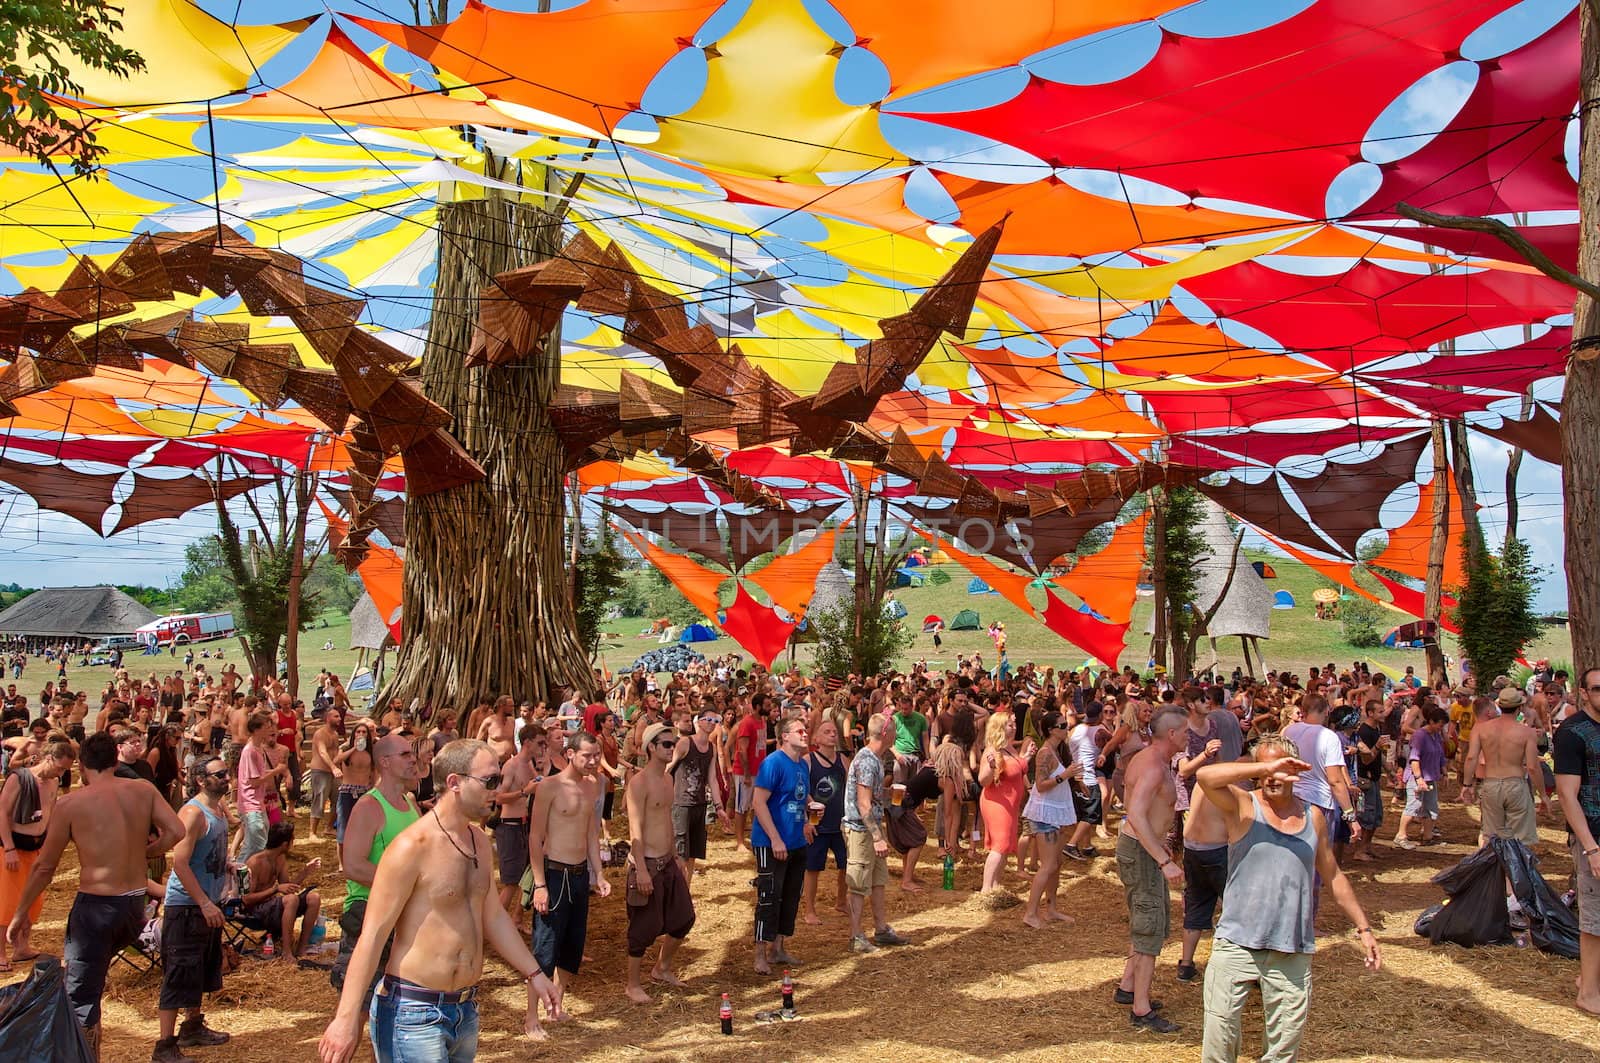 OZORA, HUNGARY - AUGUST 01: People dancing on Ozora Festival, one of the greatest psychedelic music gathering in Euorpe. Ozora, Hungary, Europe August 01, 2014.